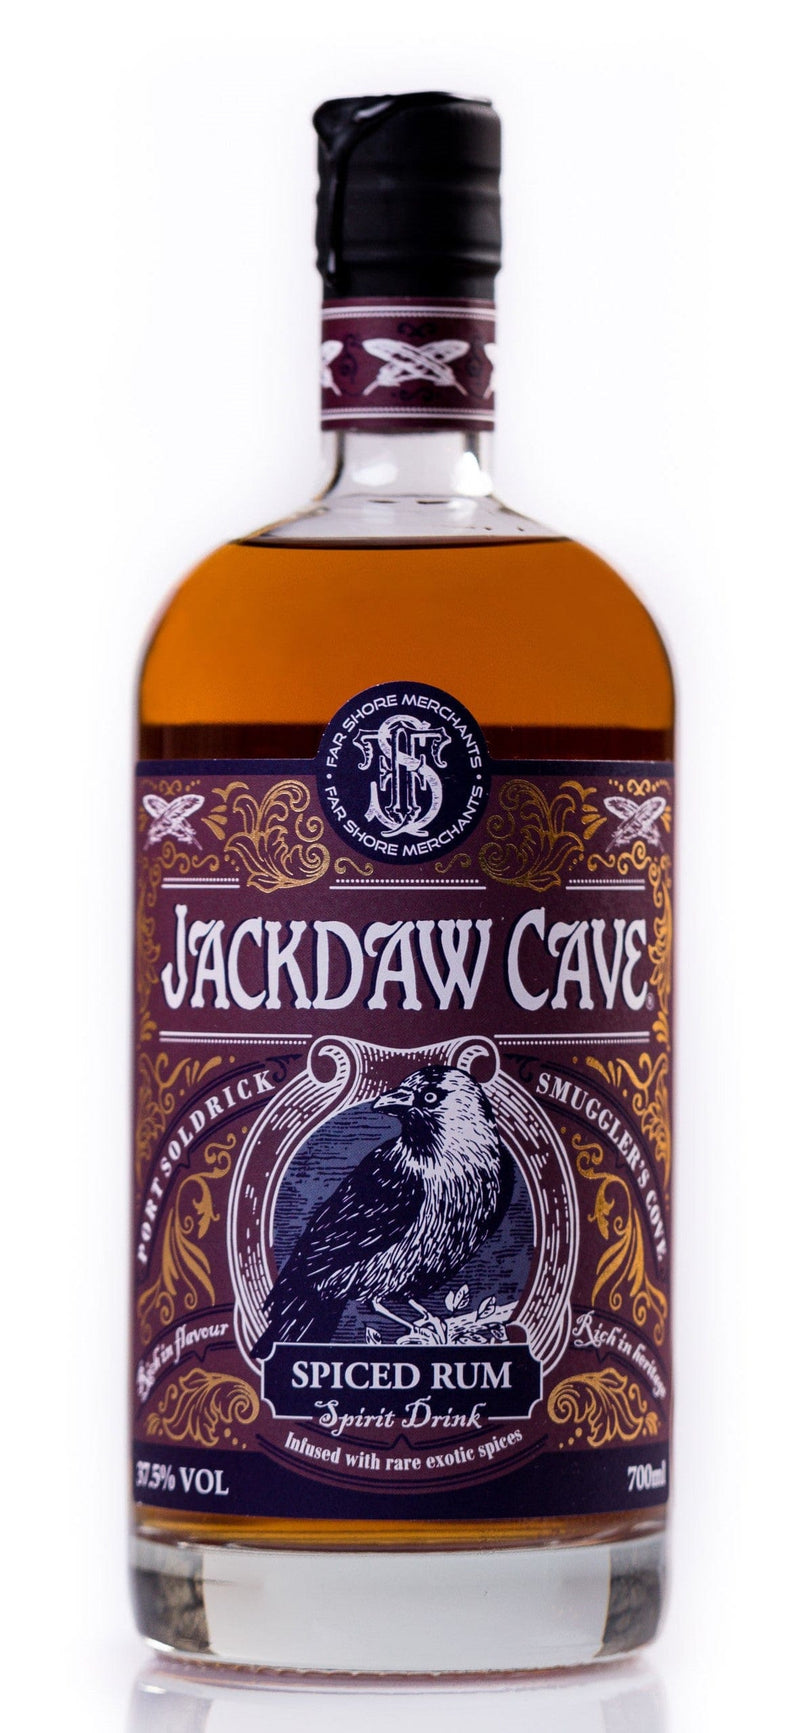 Jackdaw Cave Spiced Rum 70cl